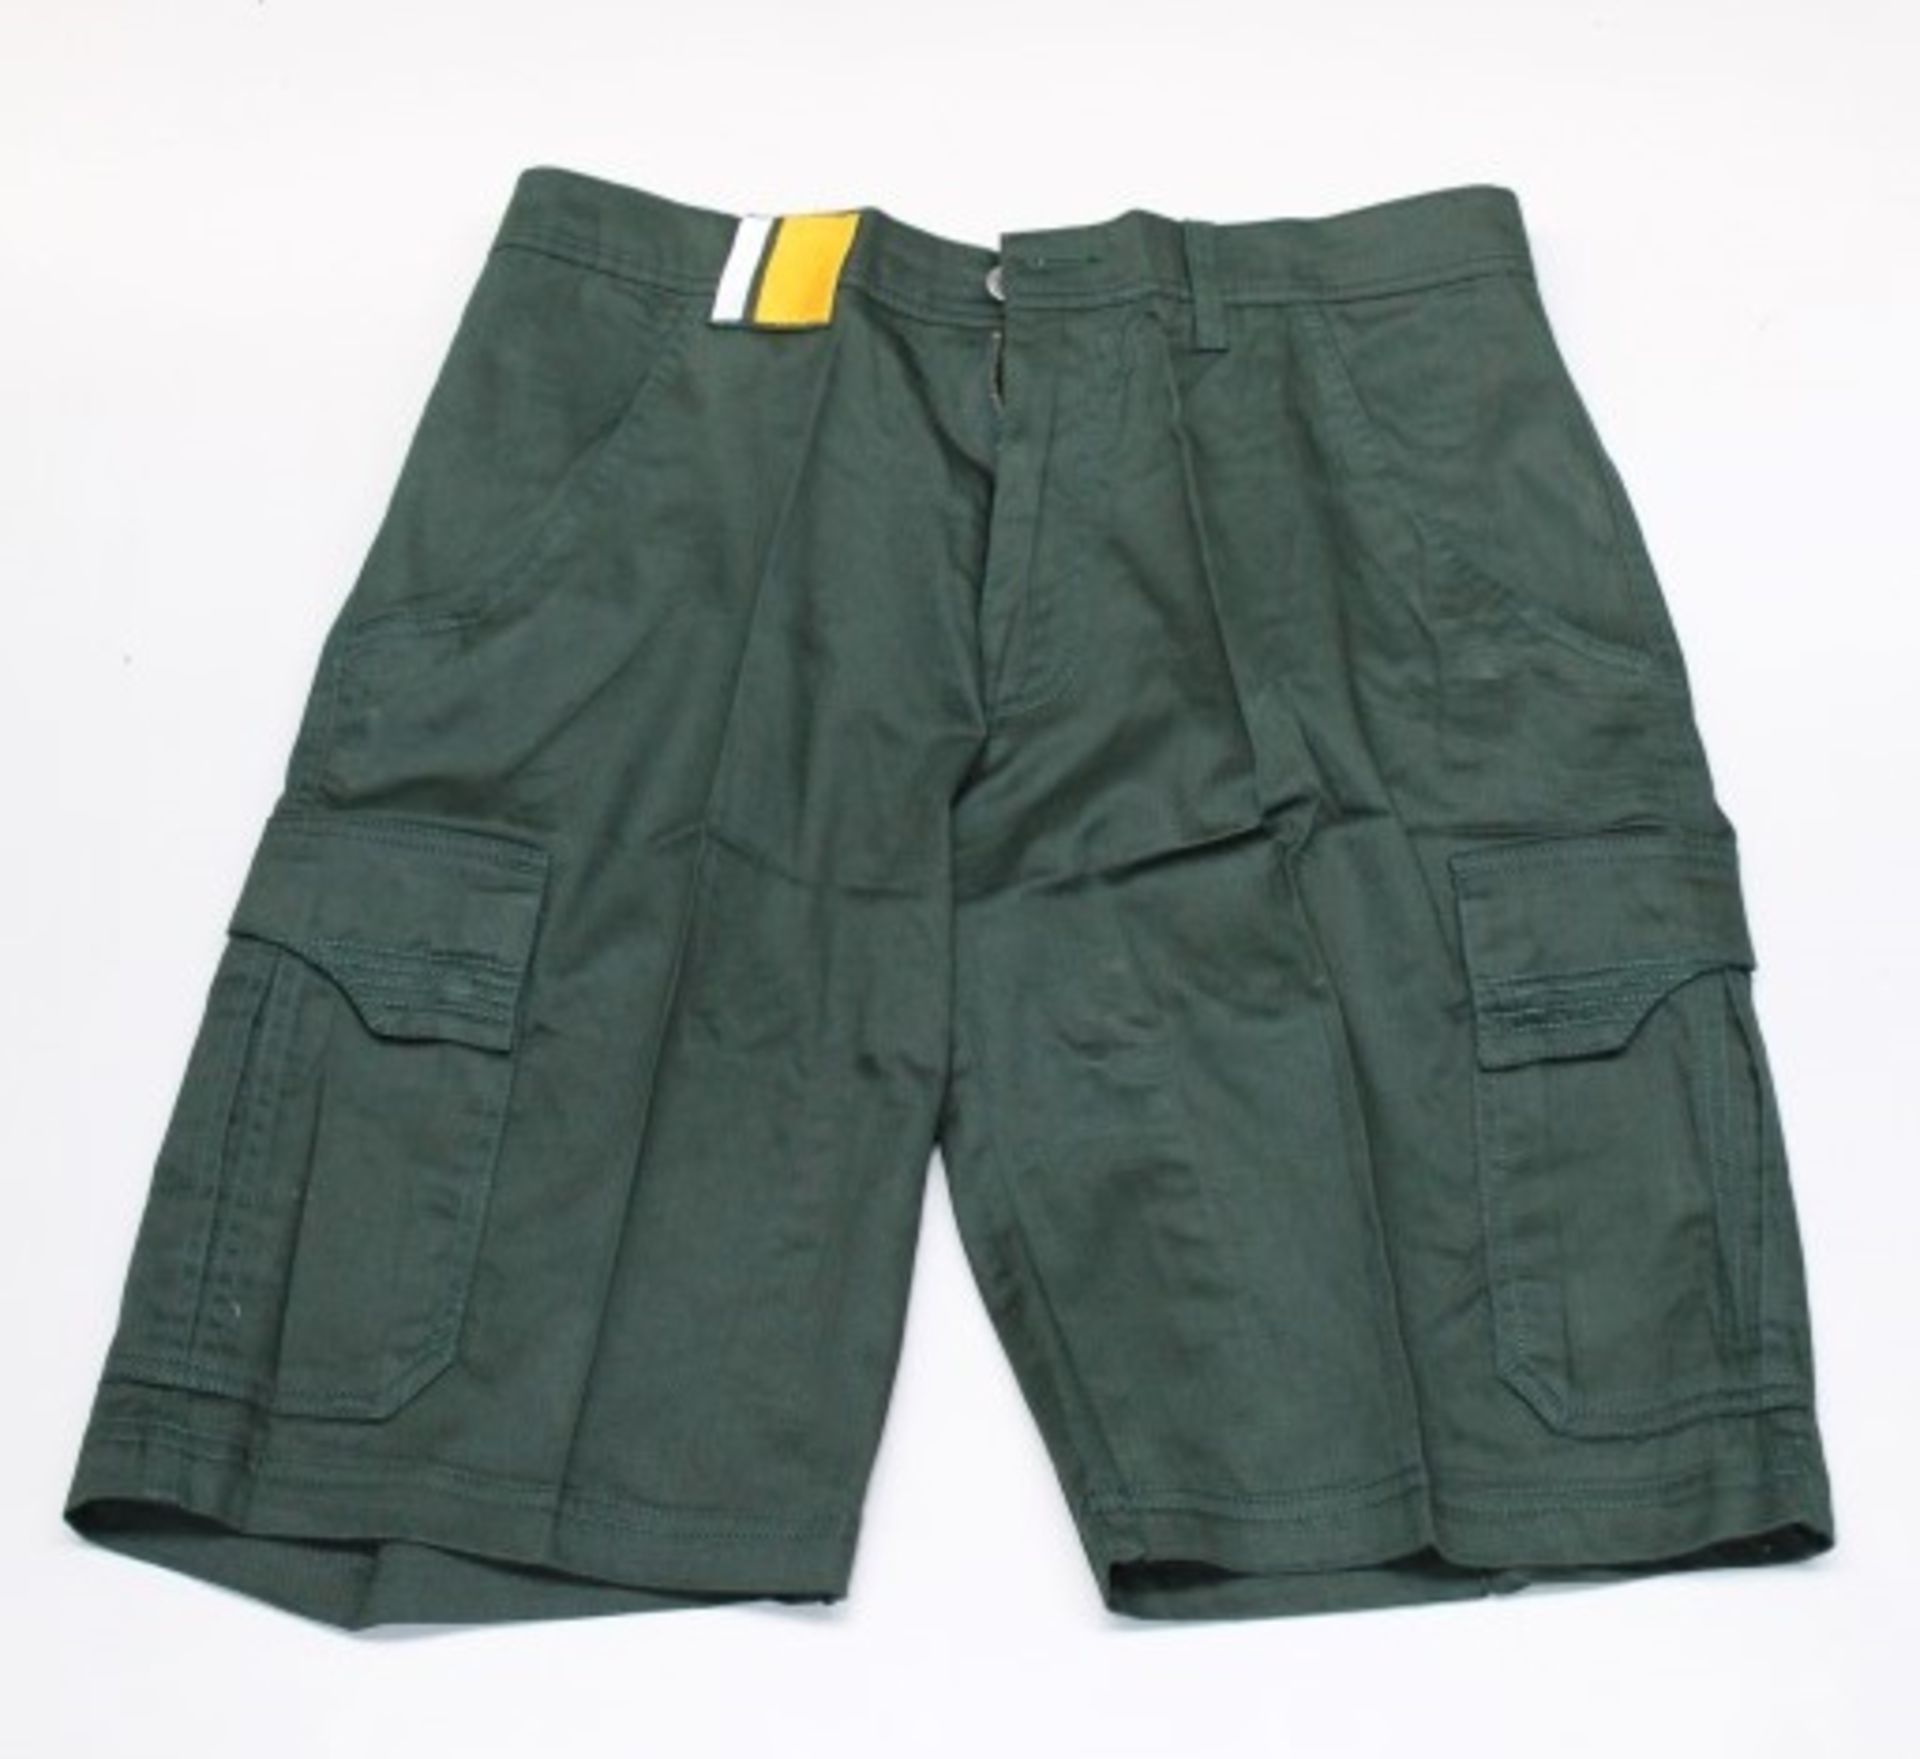 19 x Pairs Of CATERHAM F1 Team Wear Shorts - Sizes Includes: 28, 30 & 34 Waist (UK) - Ideal Casual / - Image 2 of 6